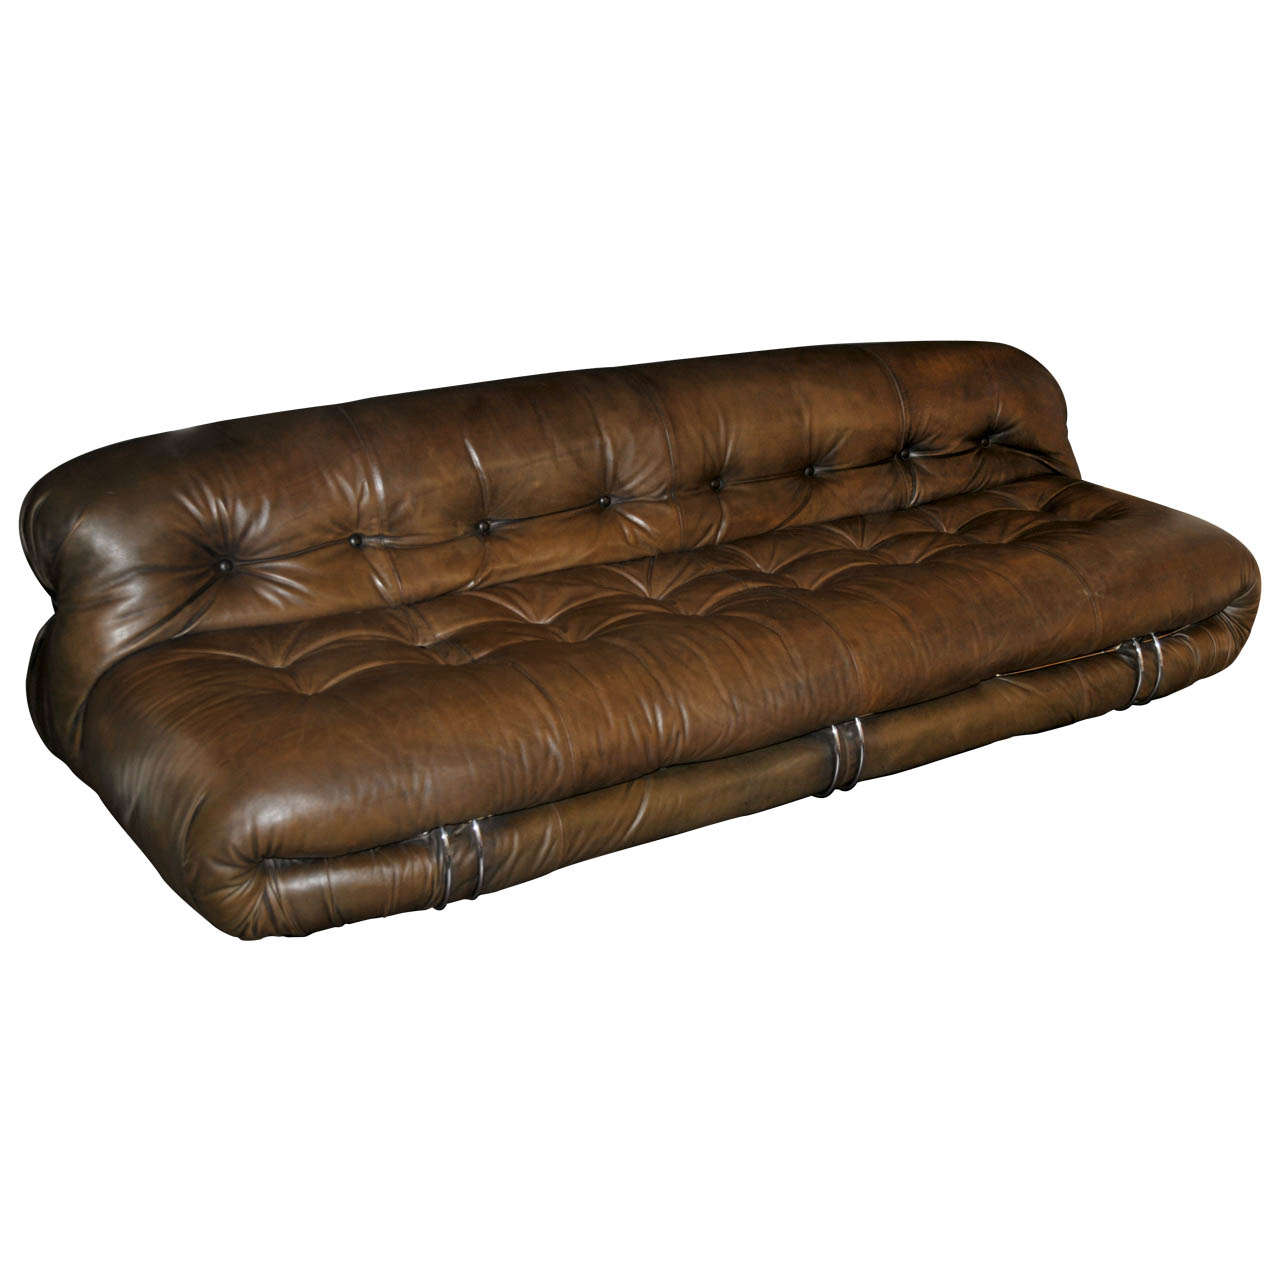 1970's Tan Brown Leather Sofa by Tobia Scarpa For Sale